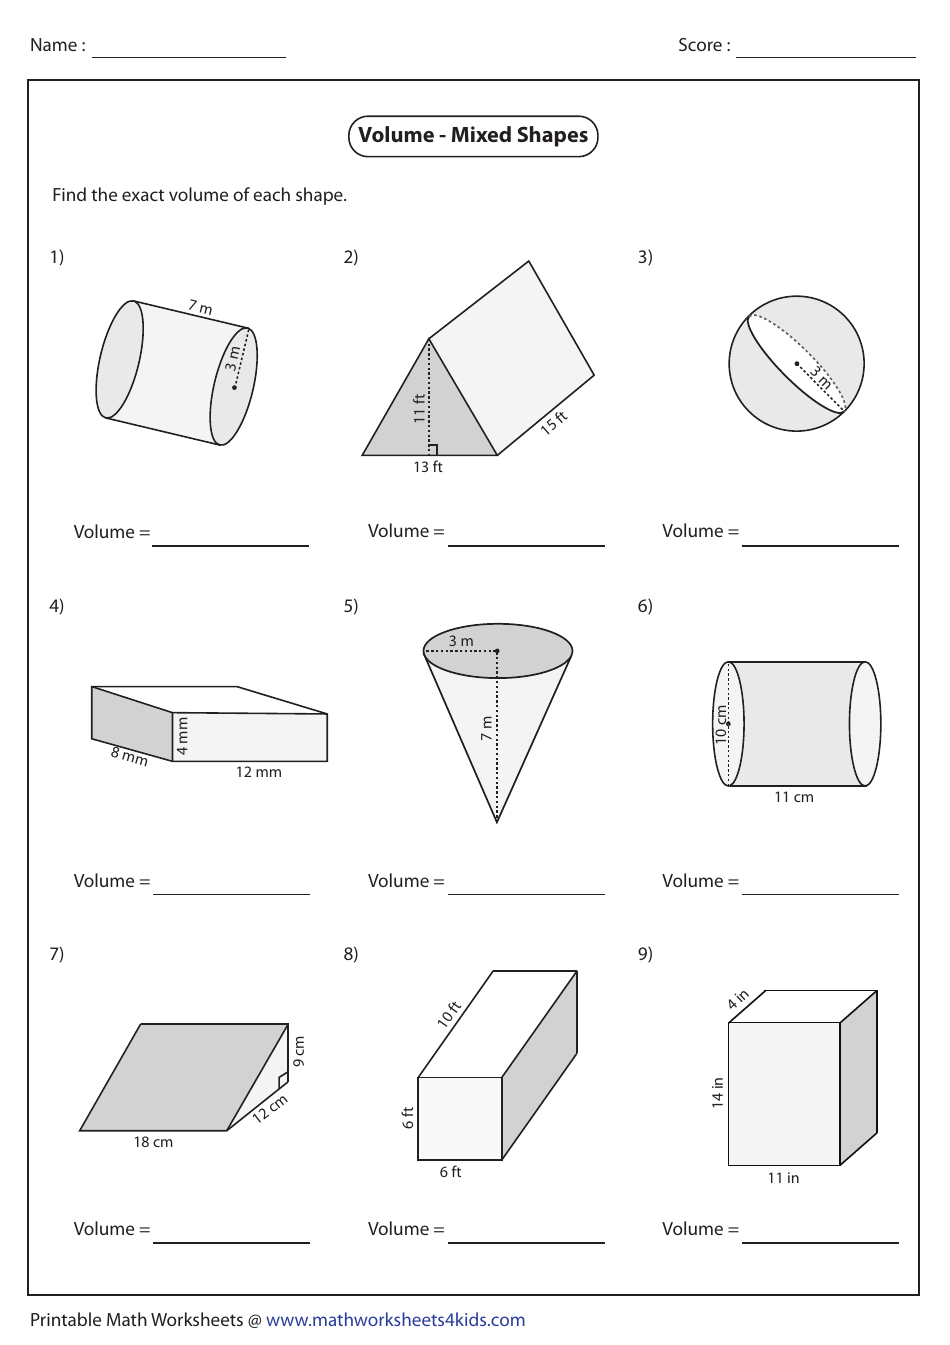 Volume - Mixed Shapes Worksheet With Answers preview image